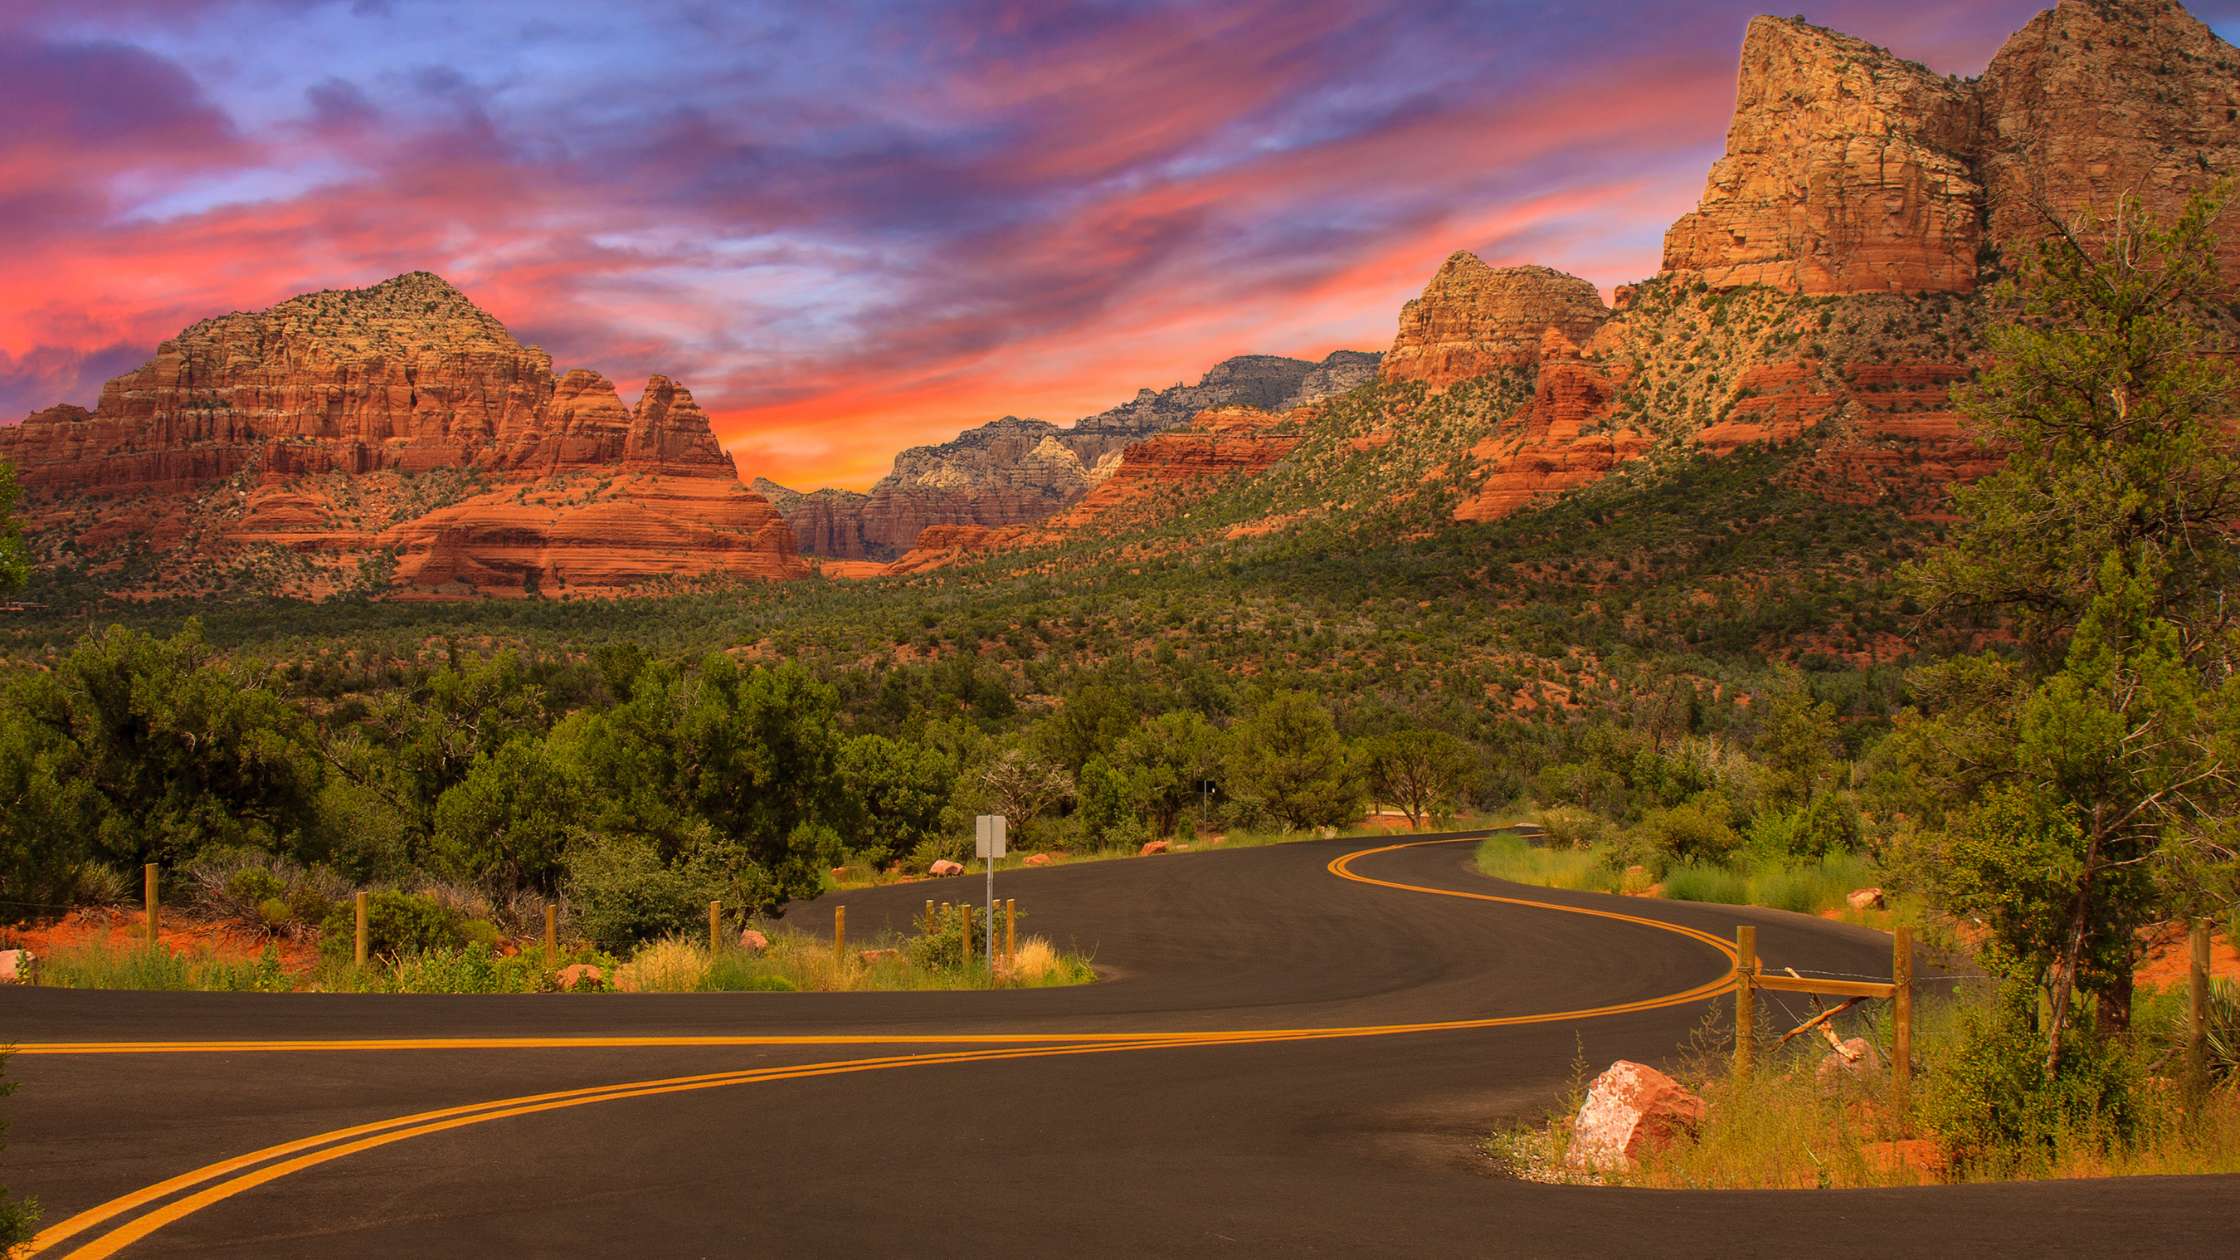 Why Hire a Luxury Vehicle For Your Sedona Wine Tasting Event